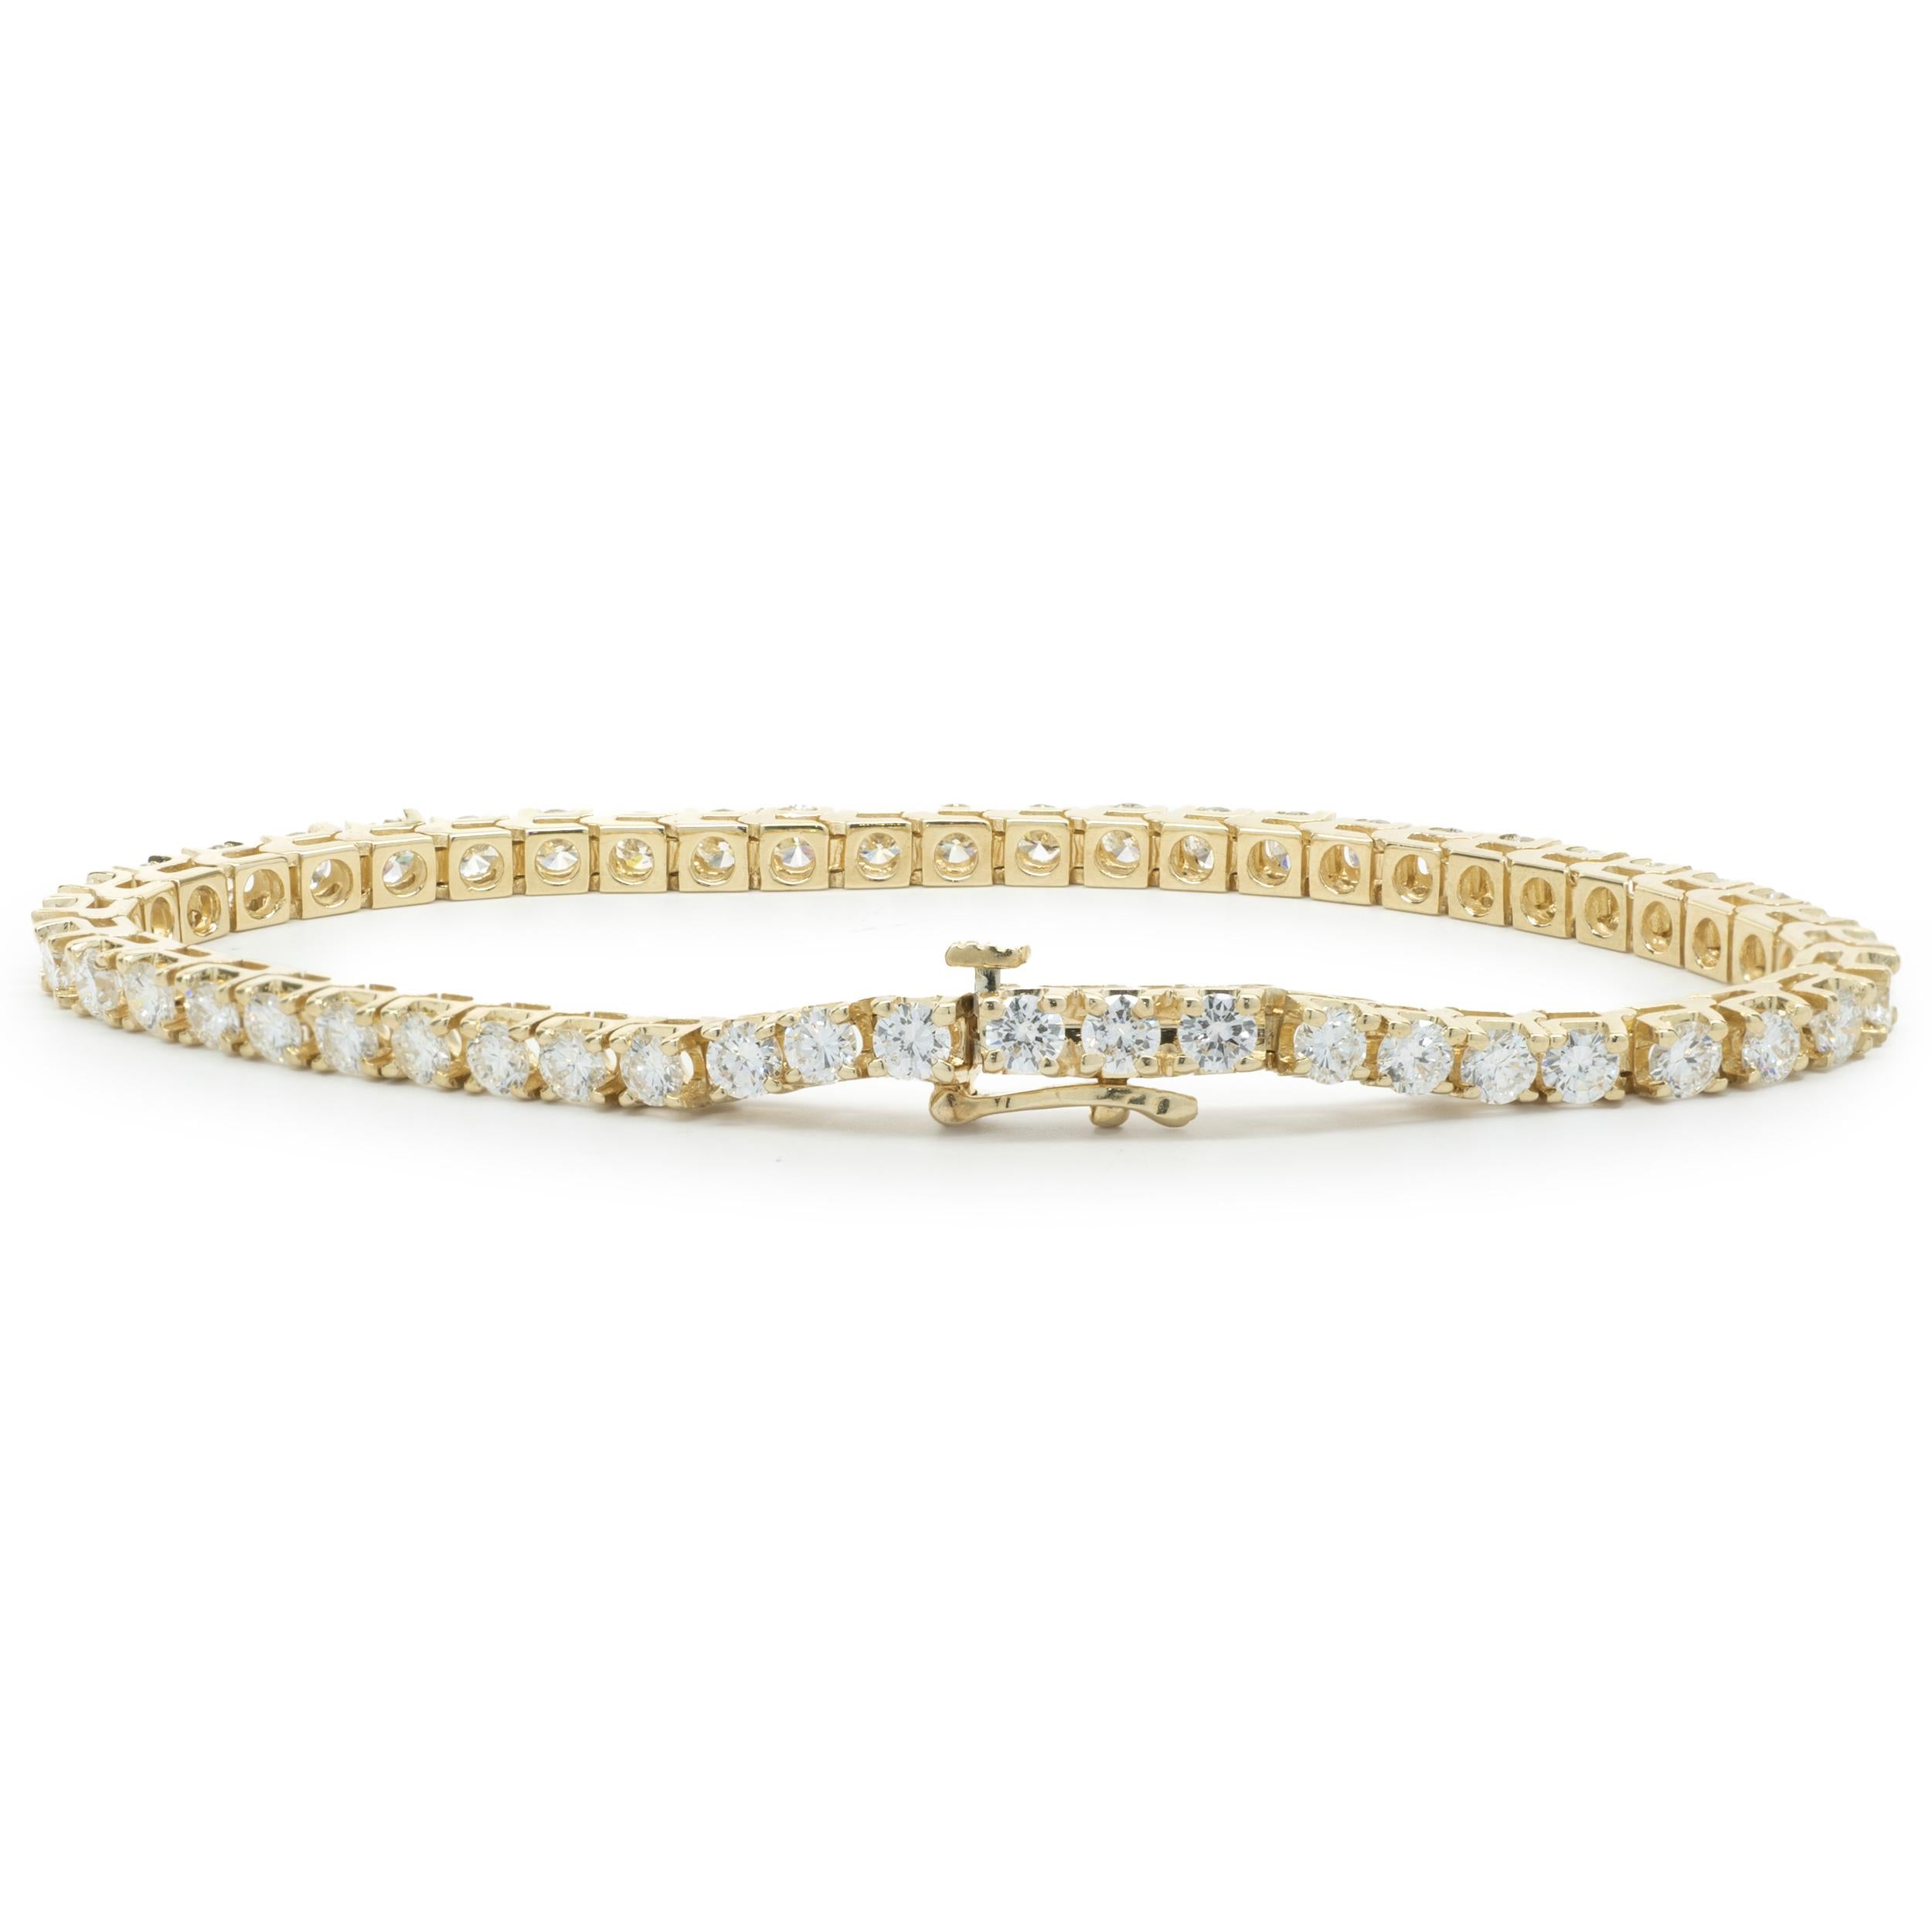 Designer: custom
Material: 14K yellow gold
Diamond: 50 round brilliant = 5.00cttw
Color: G / H
Clarity: VS2-SI1
Dimensions: bracelet will fit up to a 7-inch wrist
Weight: 12.80 grams
